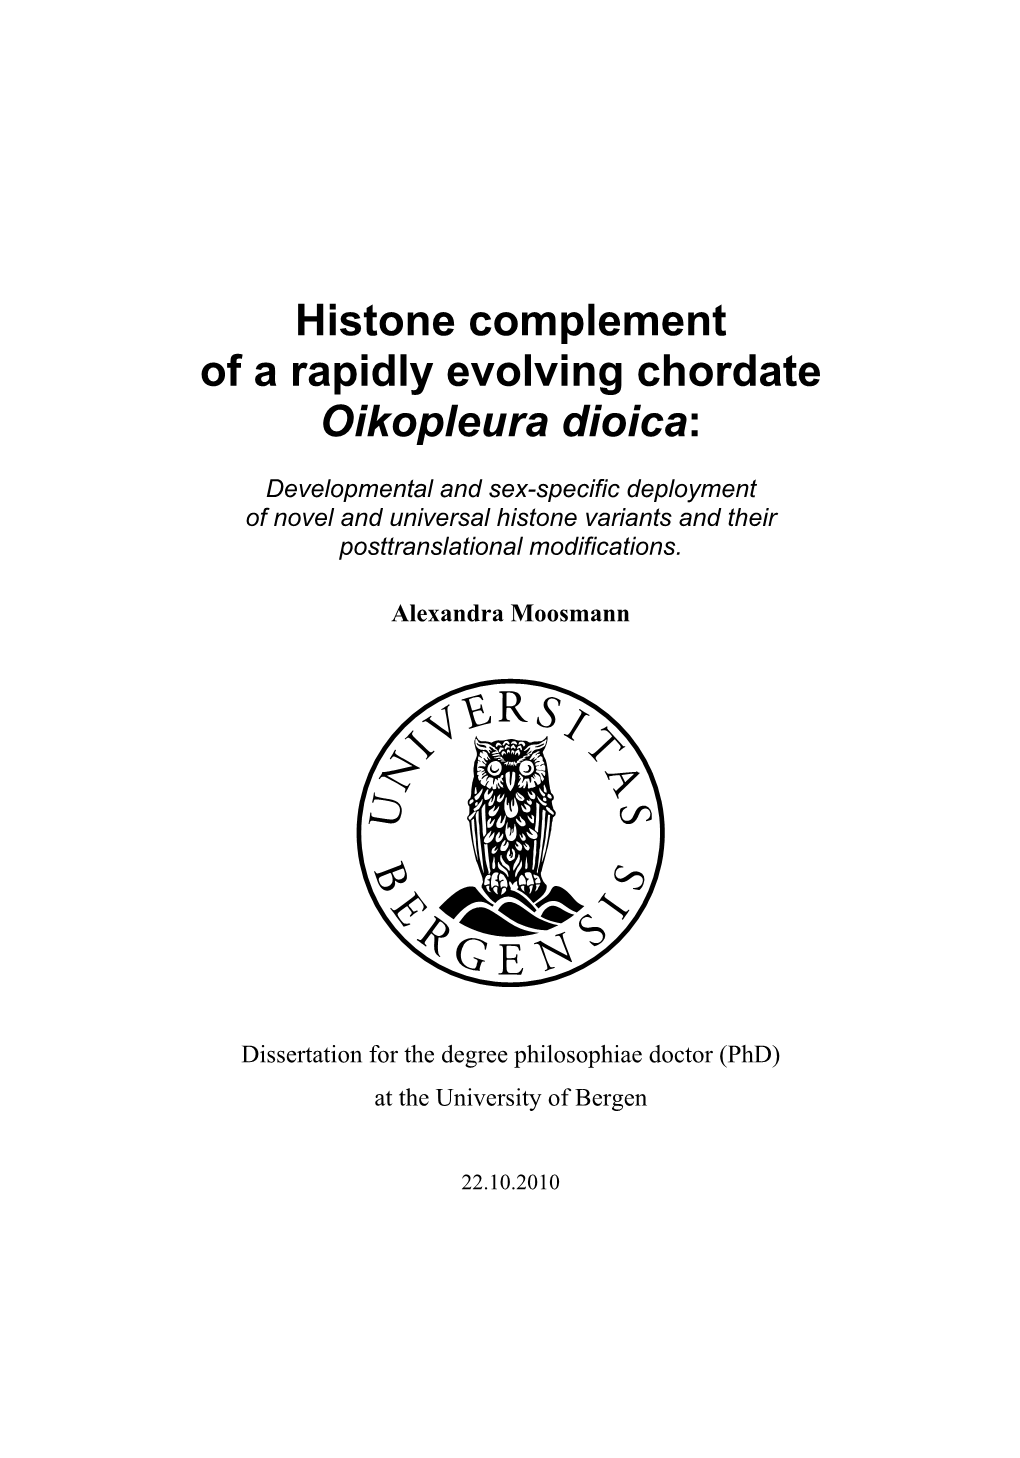 Histone Complement of a Rapidly Evolving Chordate Oikopleura Dioica